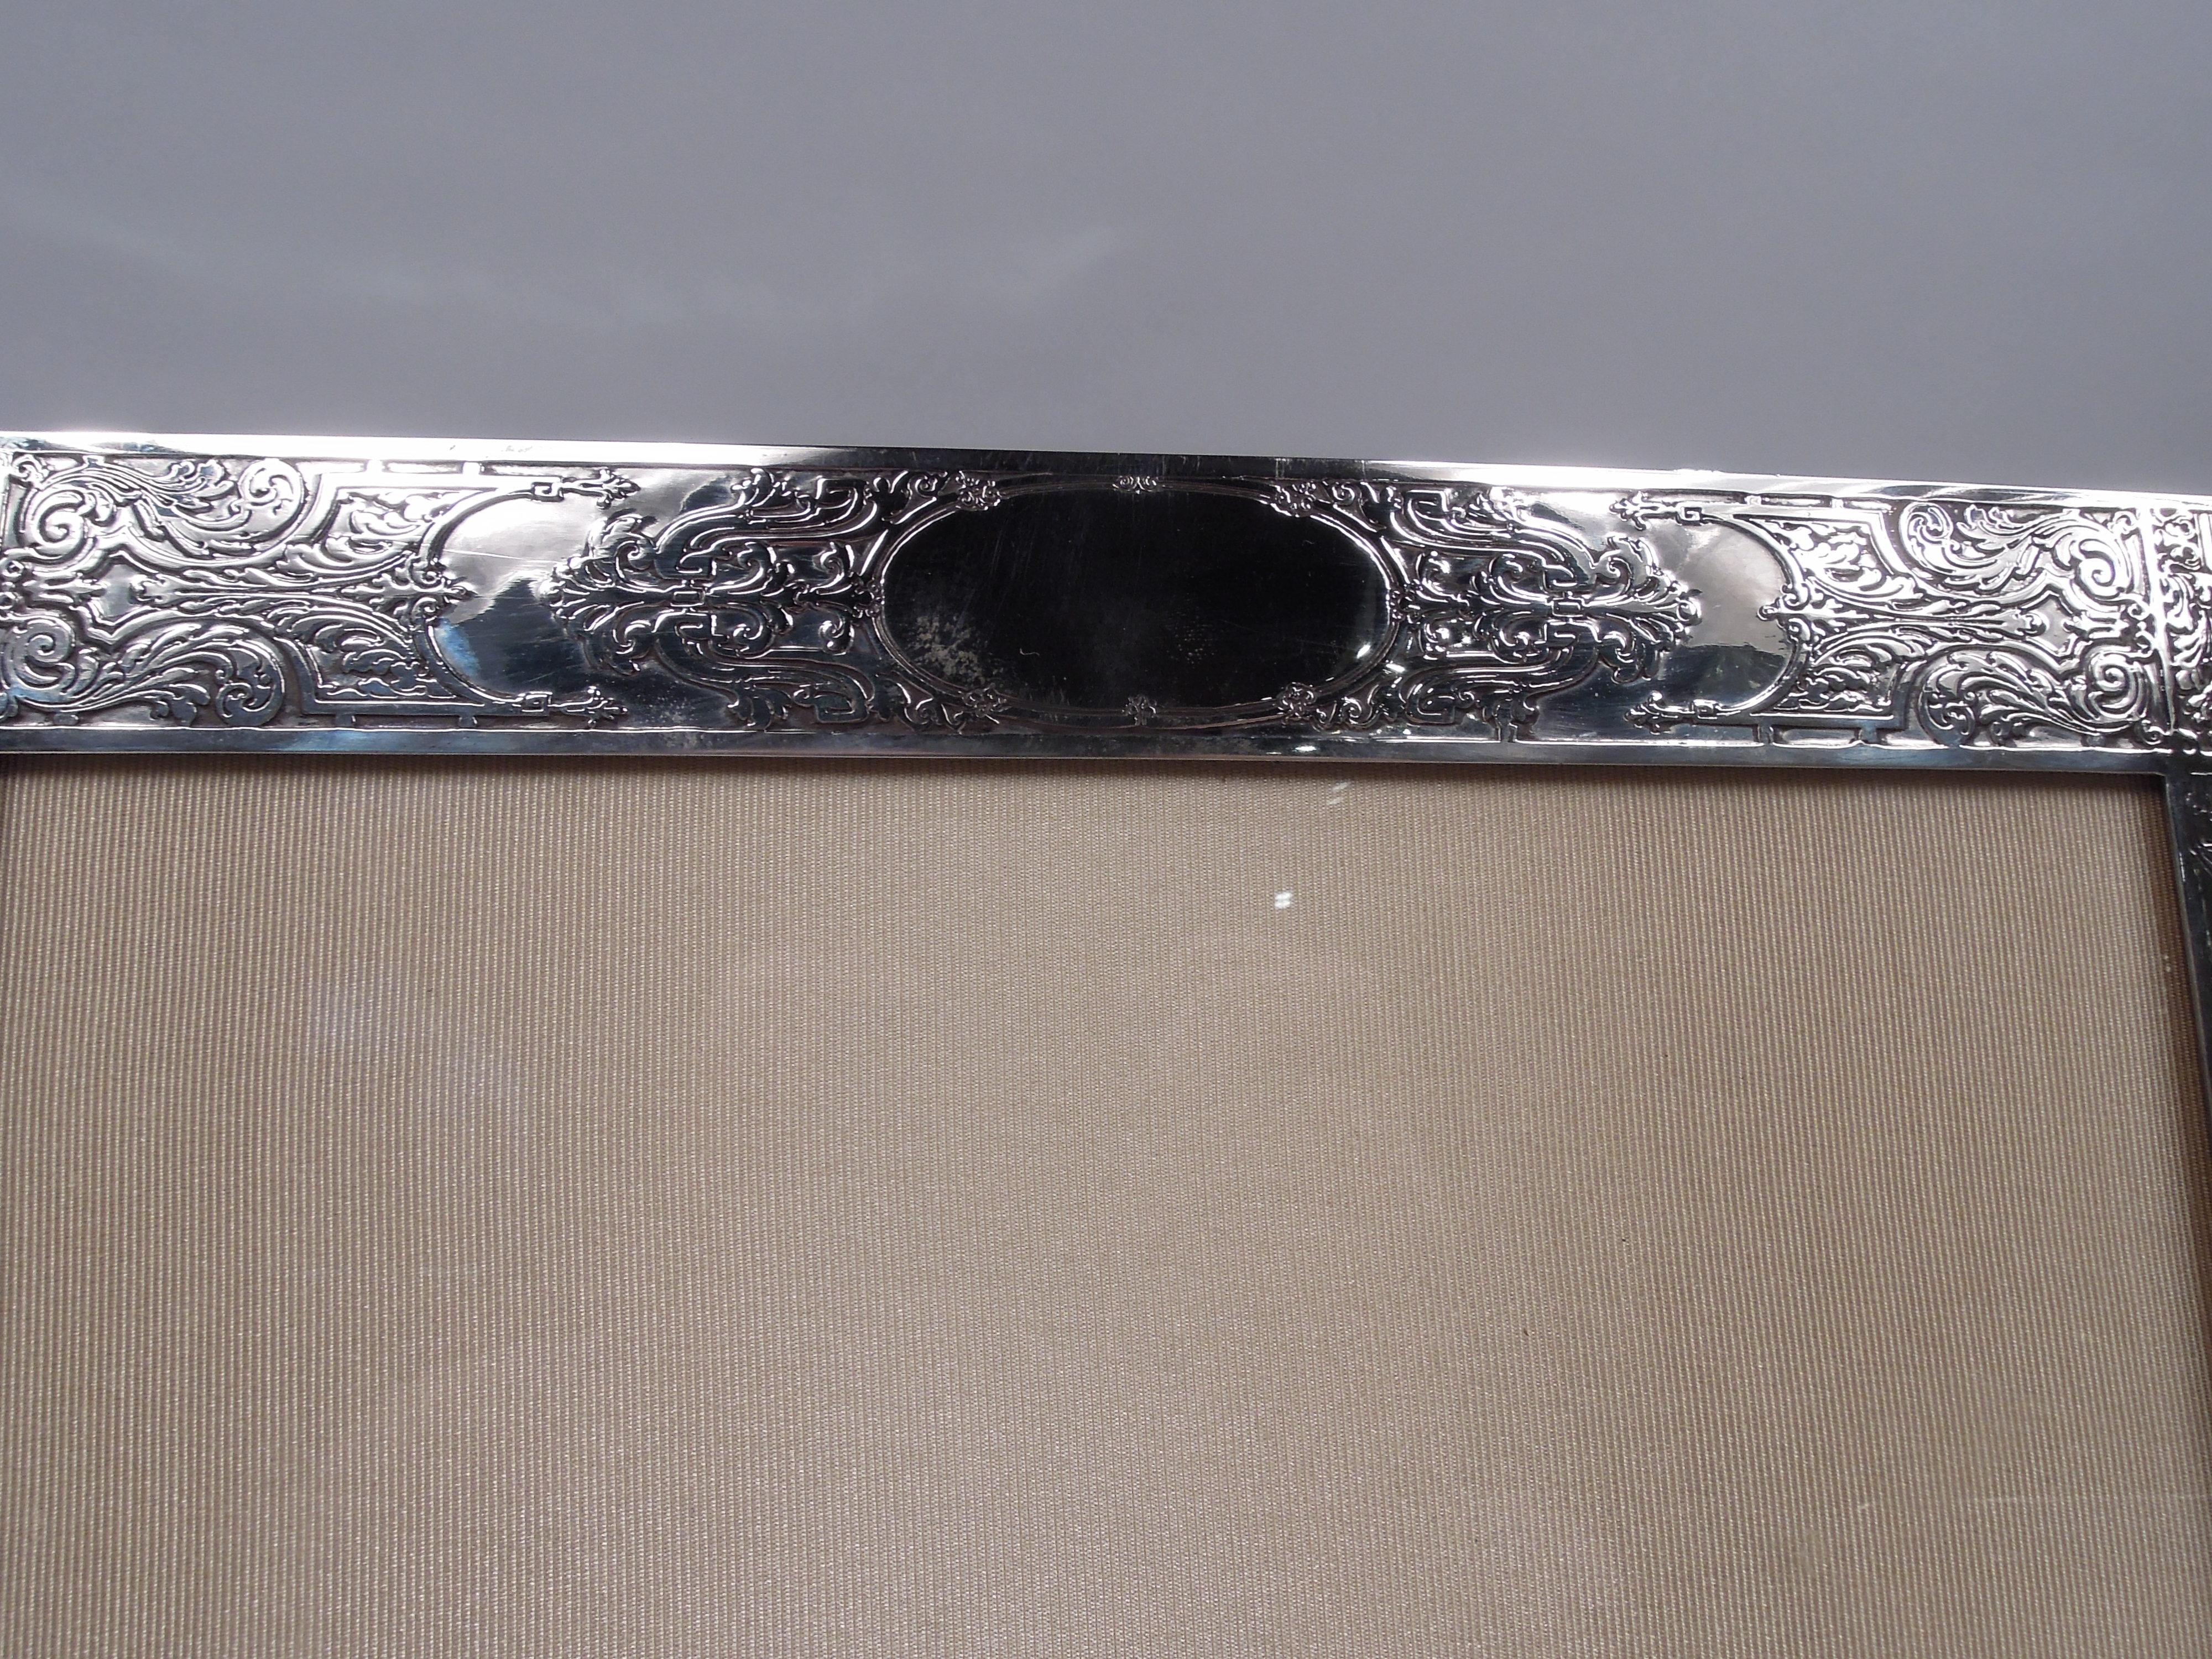 Large Edwardian Classical sterling silver picture frame. Made by The McChesney Co. in Newark, ca 1910. Rectangular window in same surround with beautiful acid-etched ornament on front: Leaf-and-dart border with corner flowerheads and ornamental